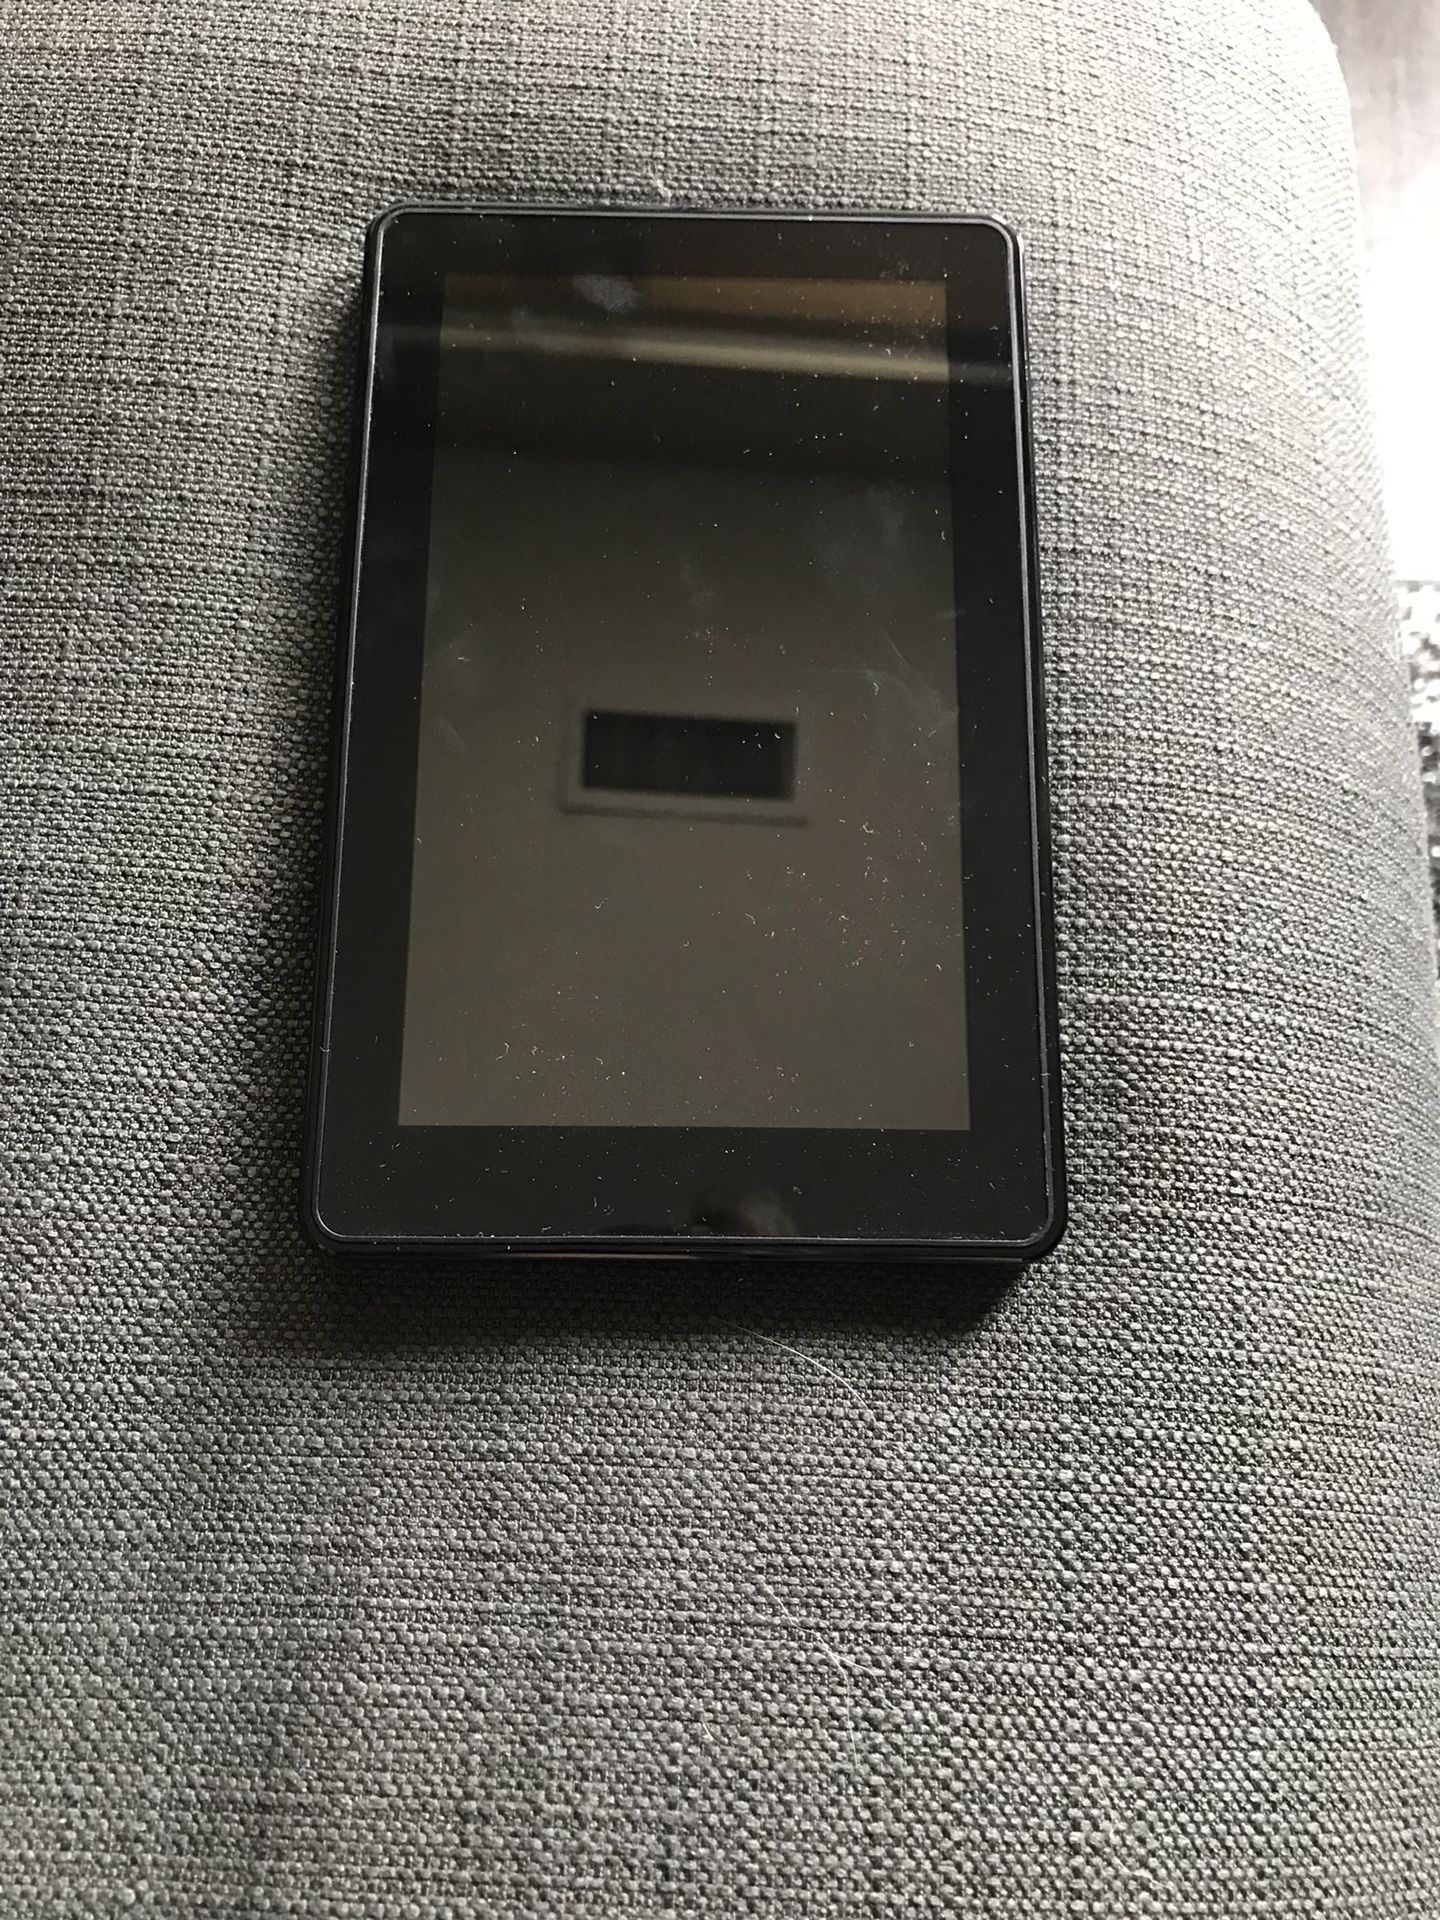 1st Gen Kindle Wi-fi 8GB with Case and Charger